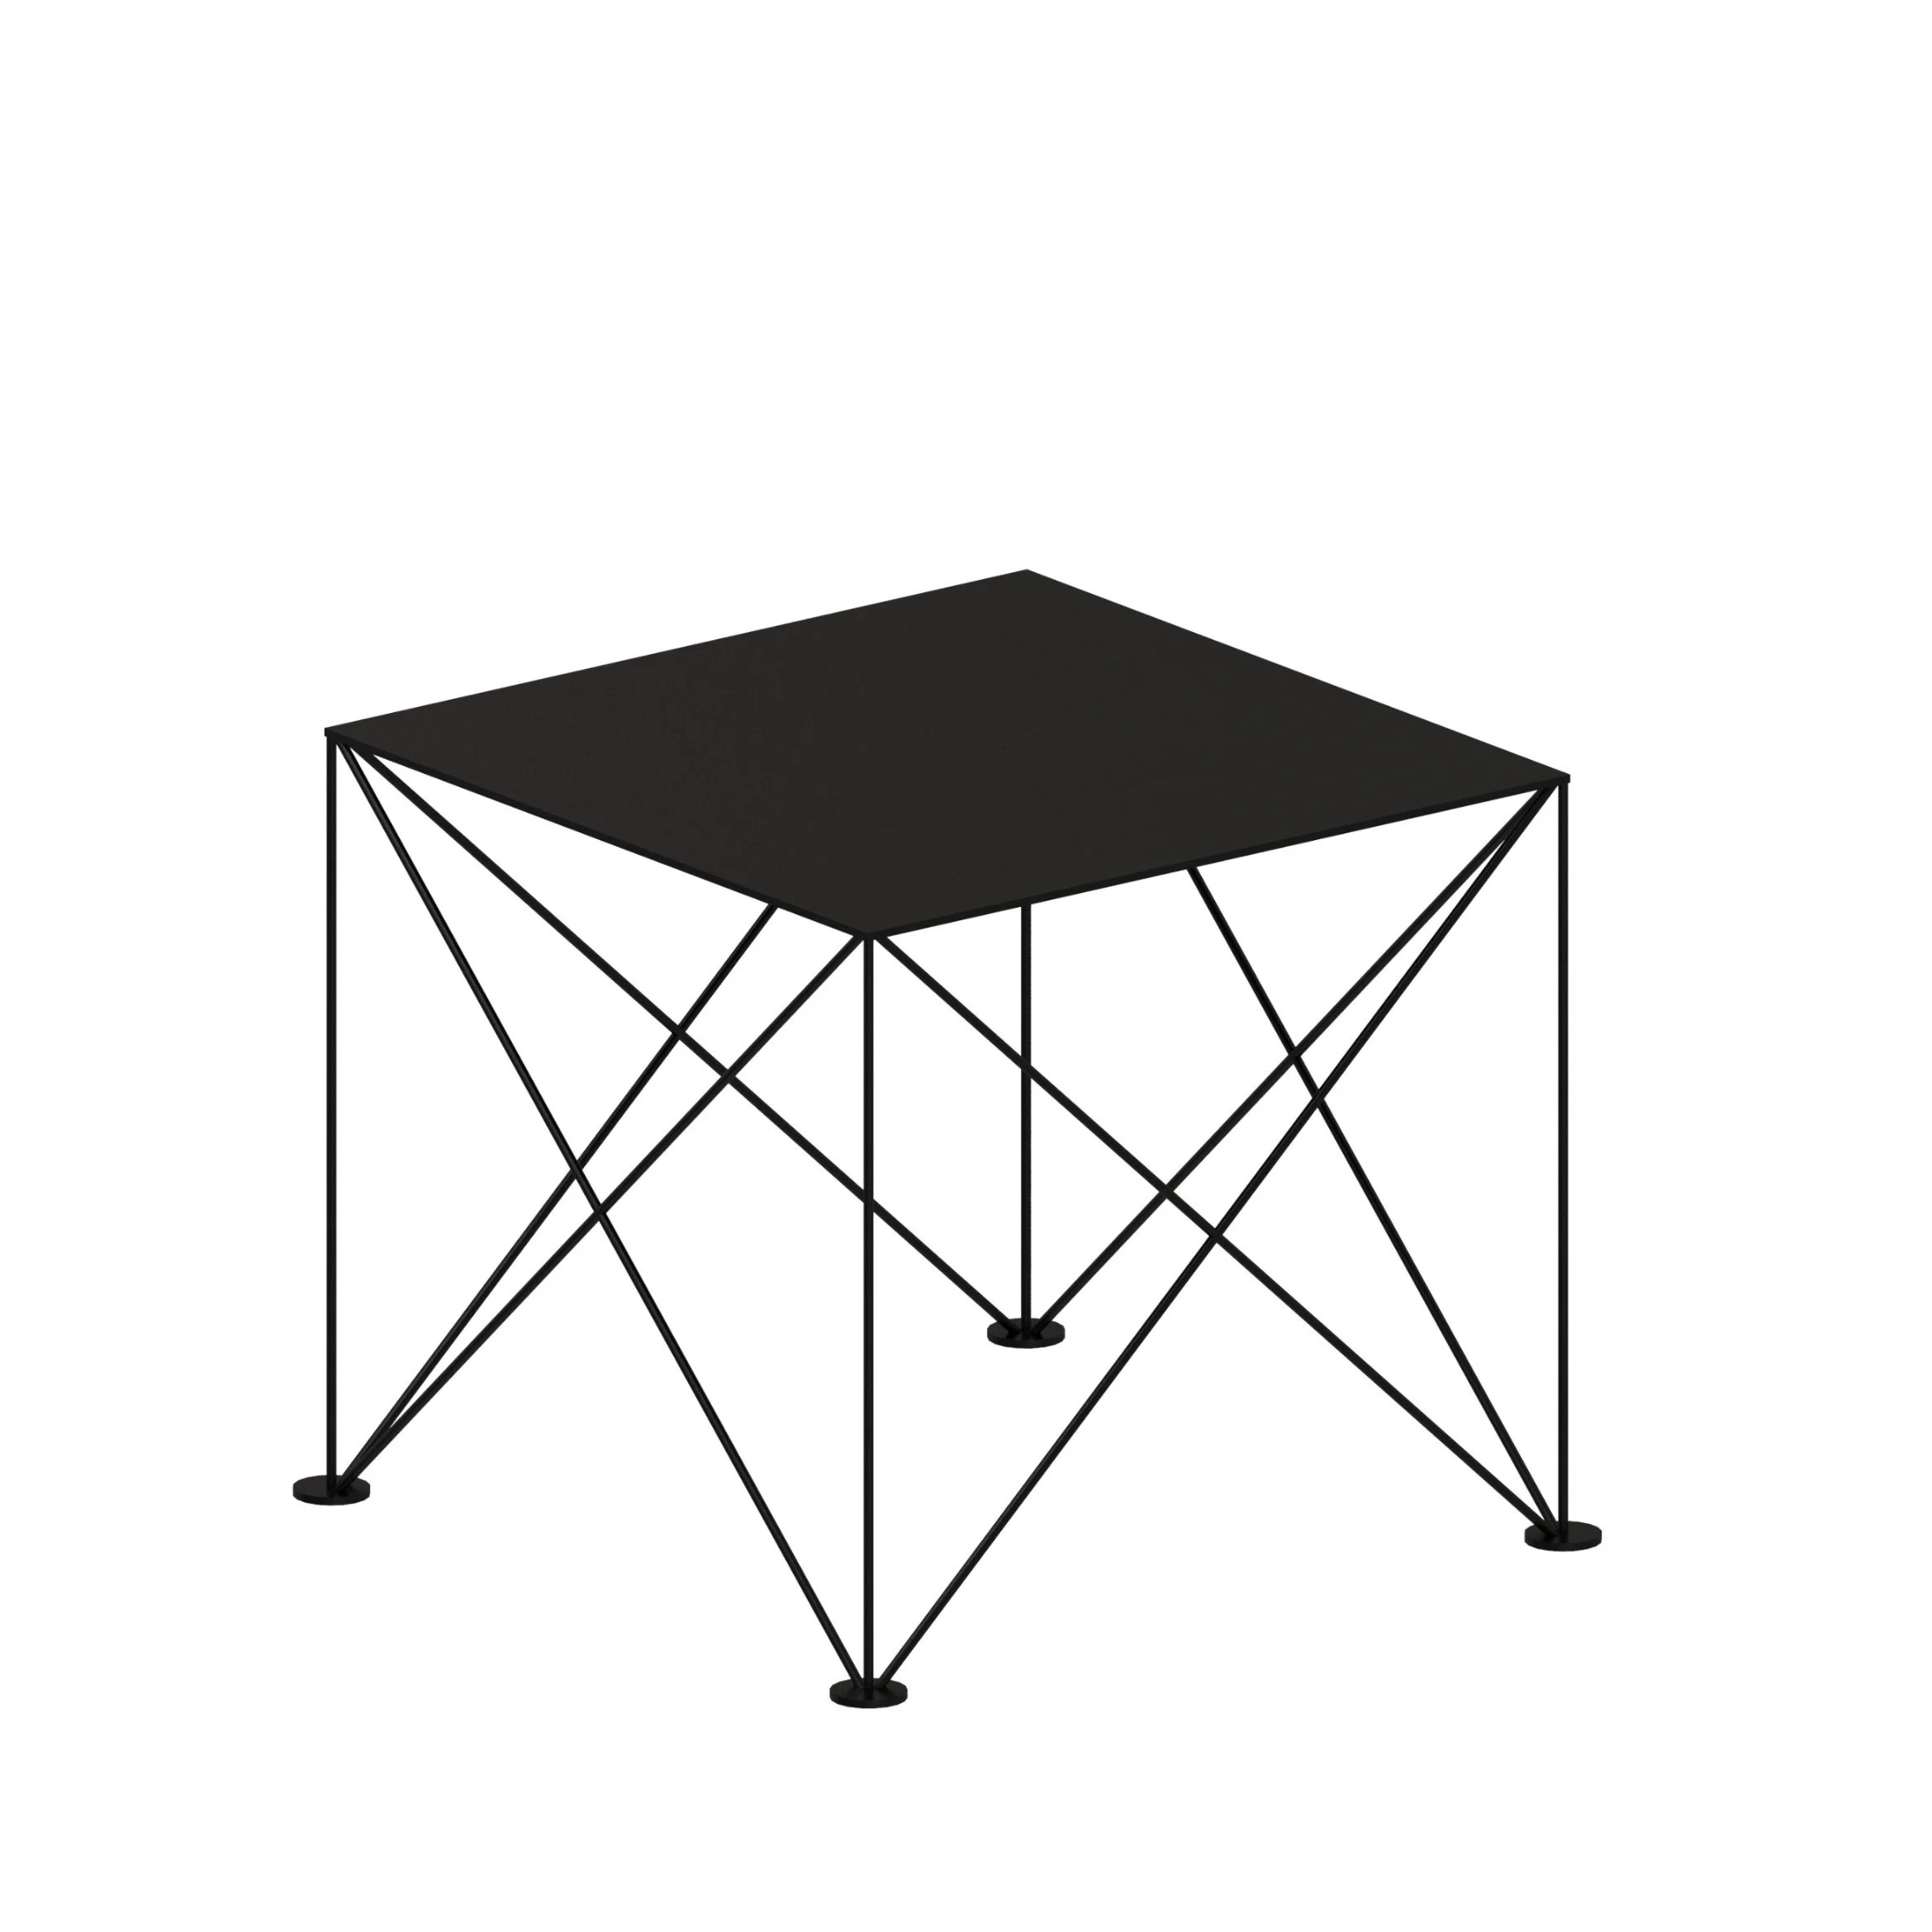 LIGHT STAR low table